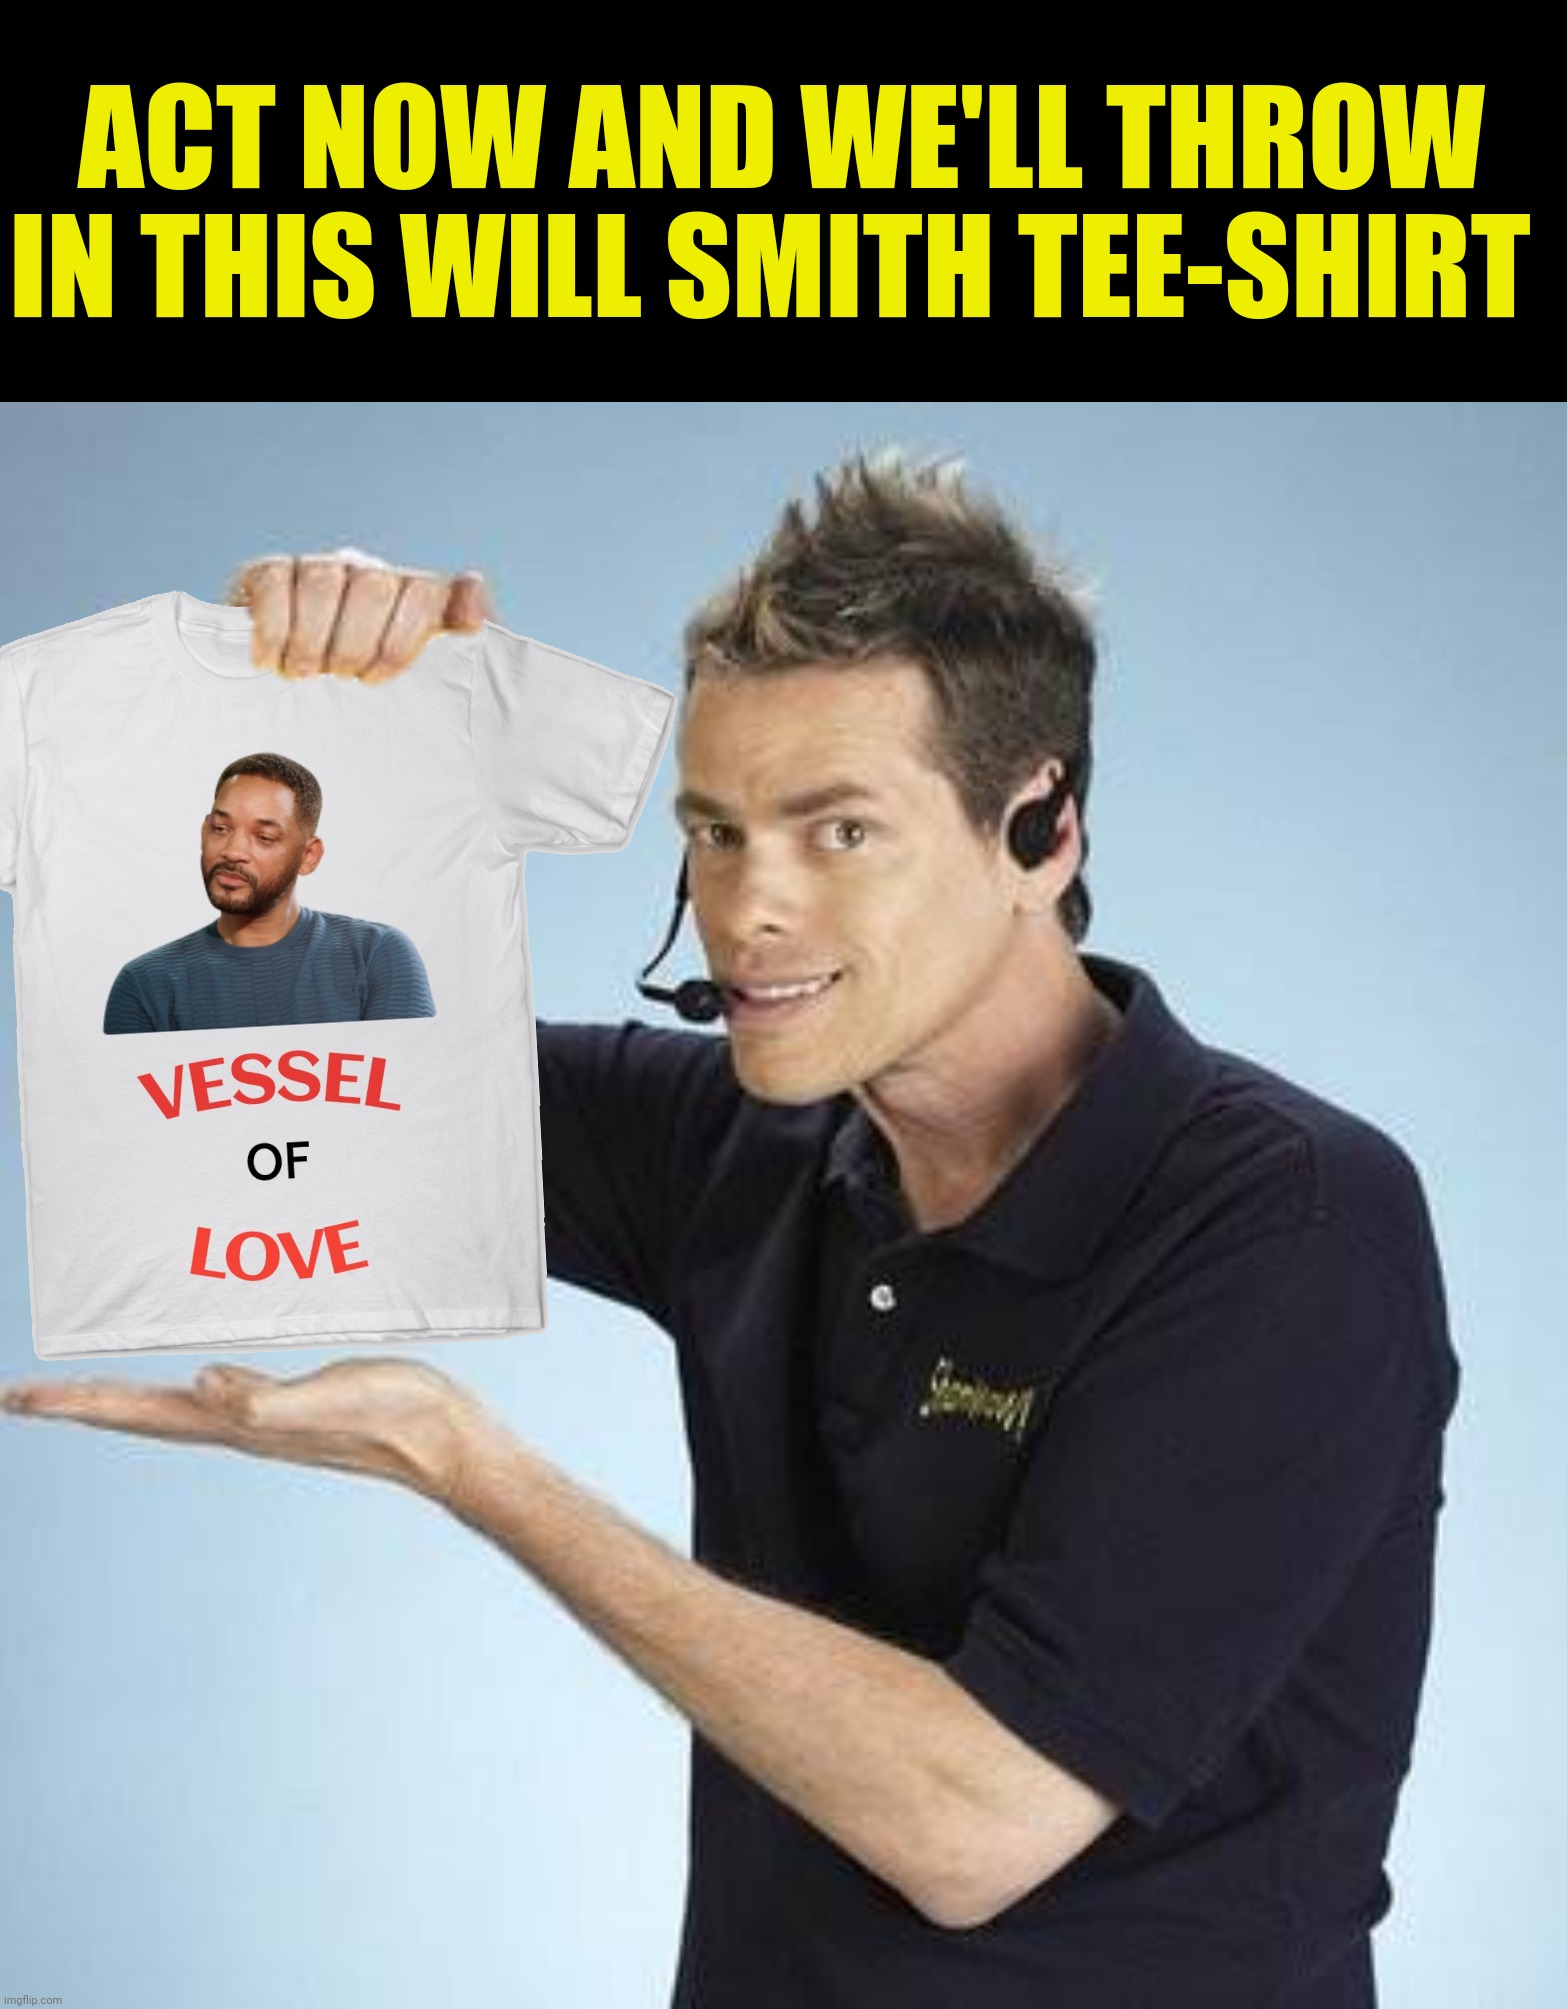 ACT NOW AND WE'LL THROW IN THIS WILL SMITH TEE-SHIRT | made w/ Imgflip meme maker